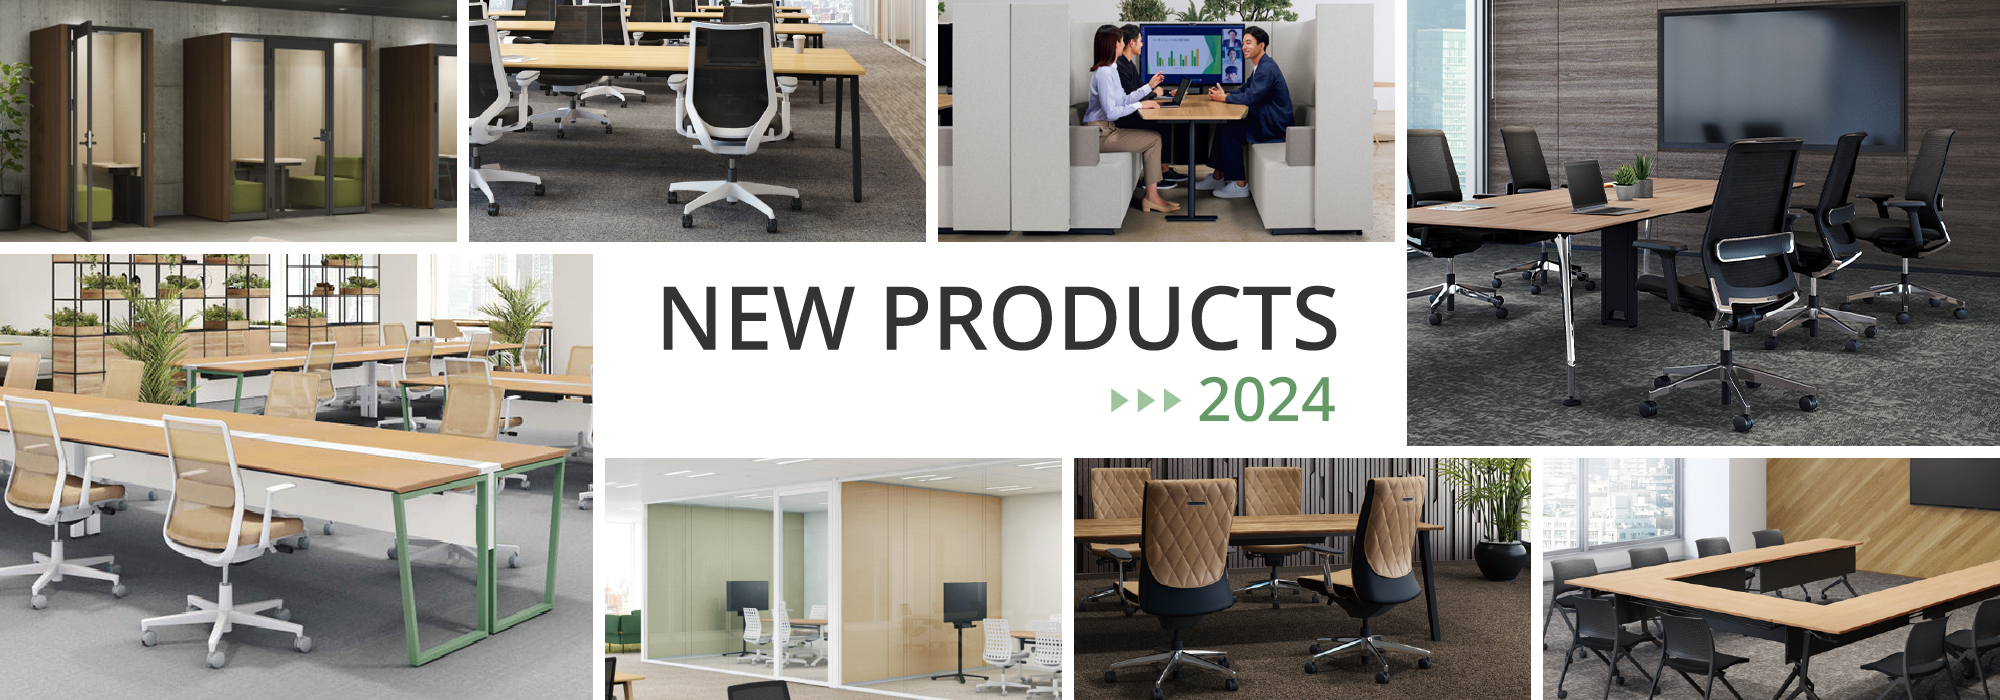 NEW PRODUCTS 2024